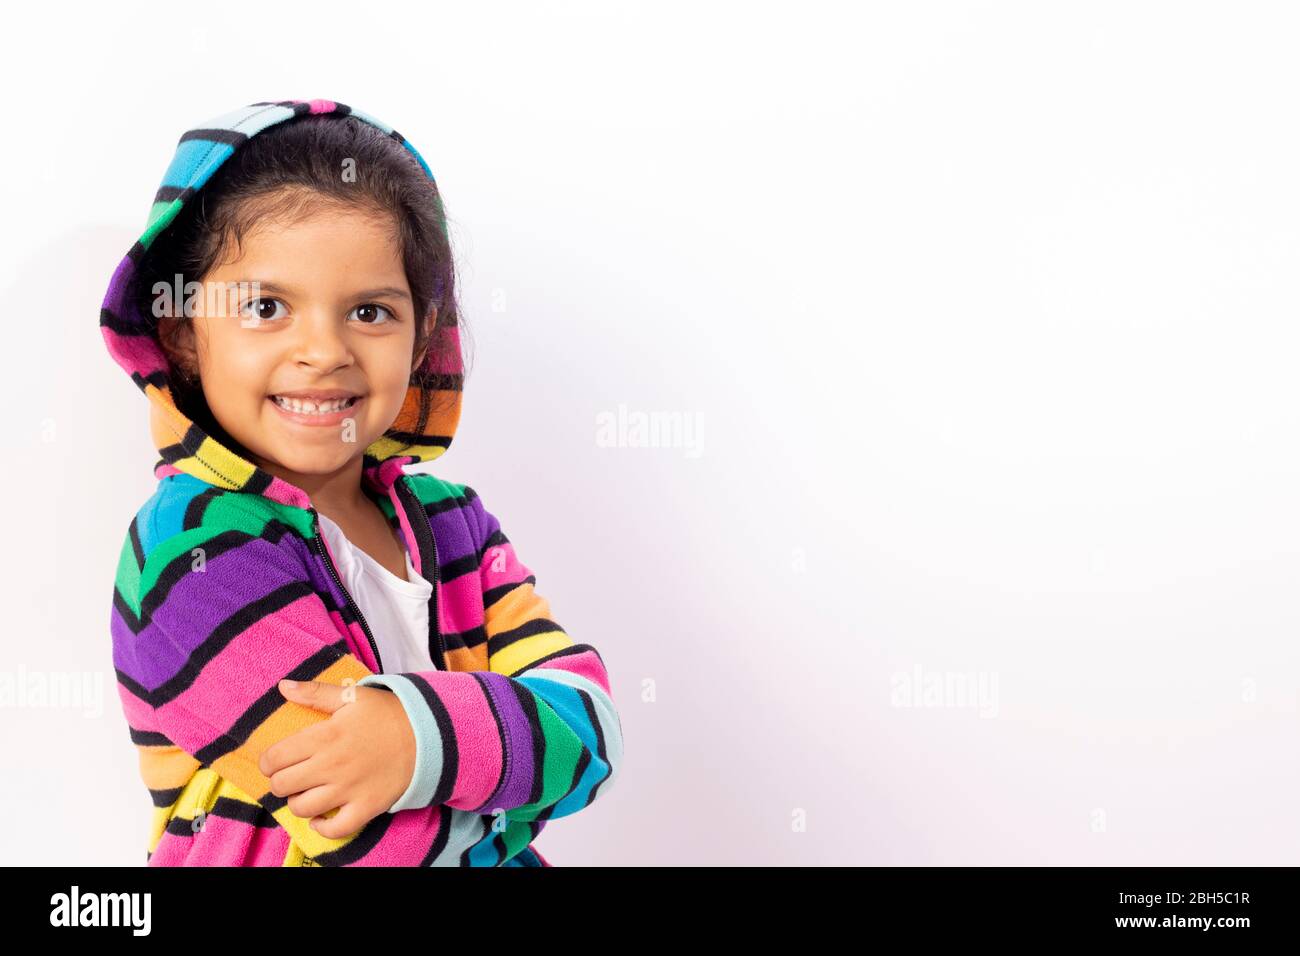 Little girl with cute face with her colorful sweater, with a white background Stock Photo